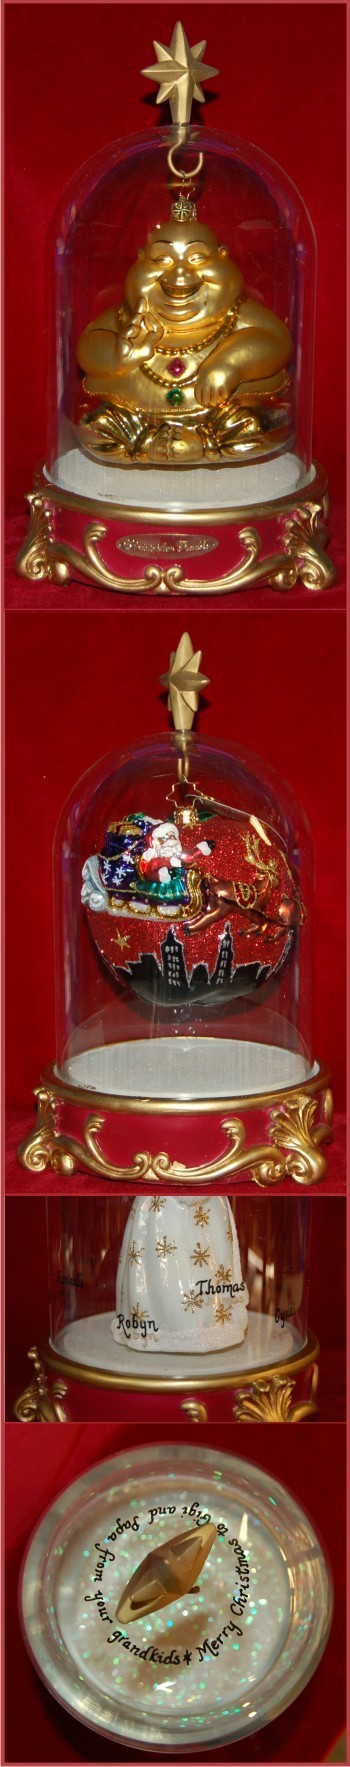 Medium Ornament Keepsake Dome - Up to 8 People Christmas Ornament Personalized by Russell Rhodes